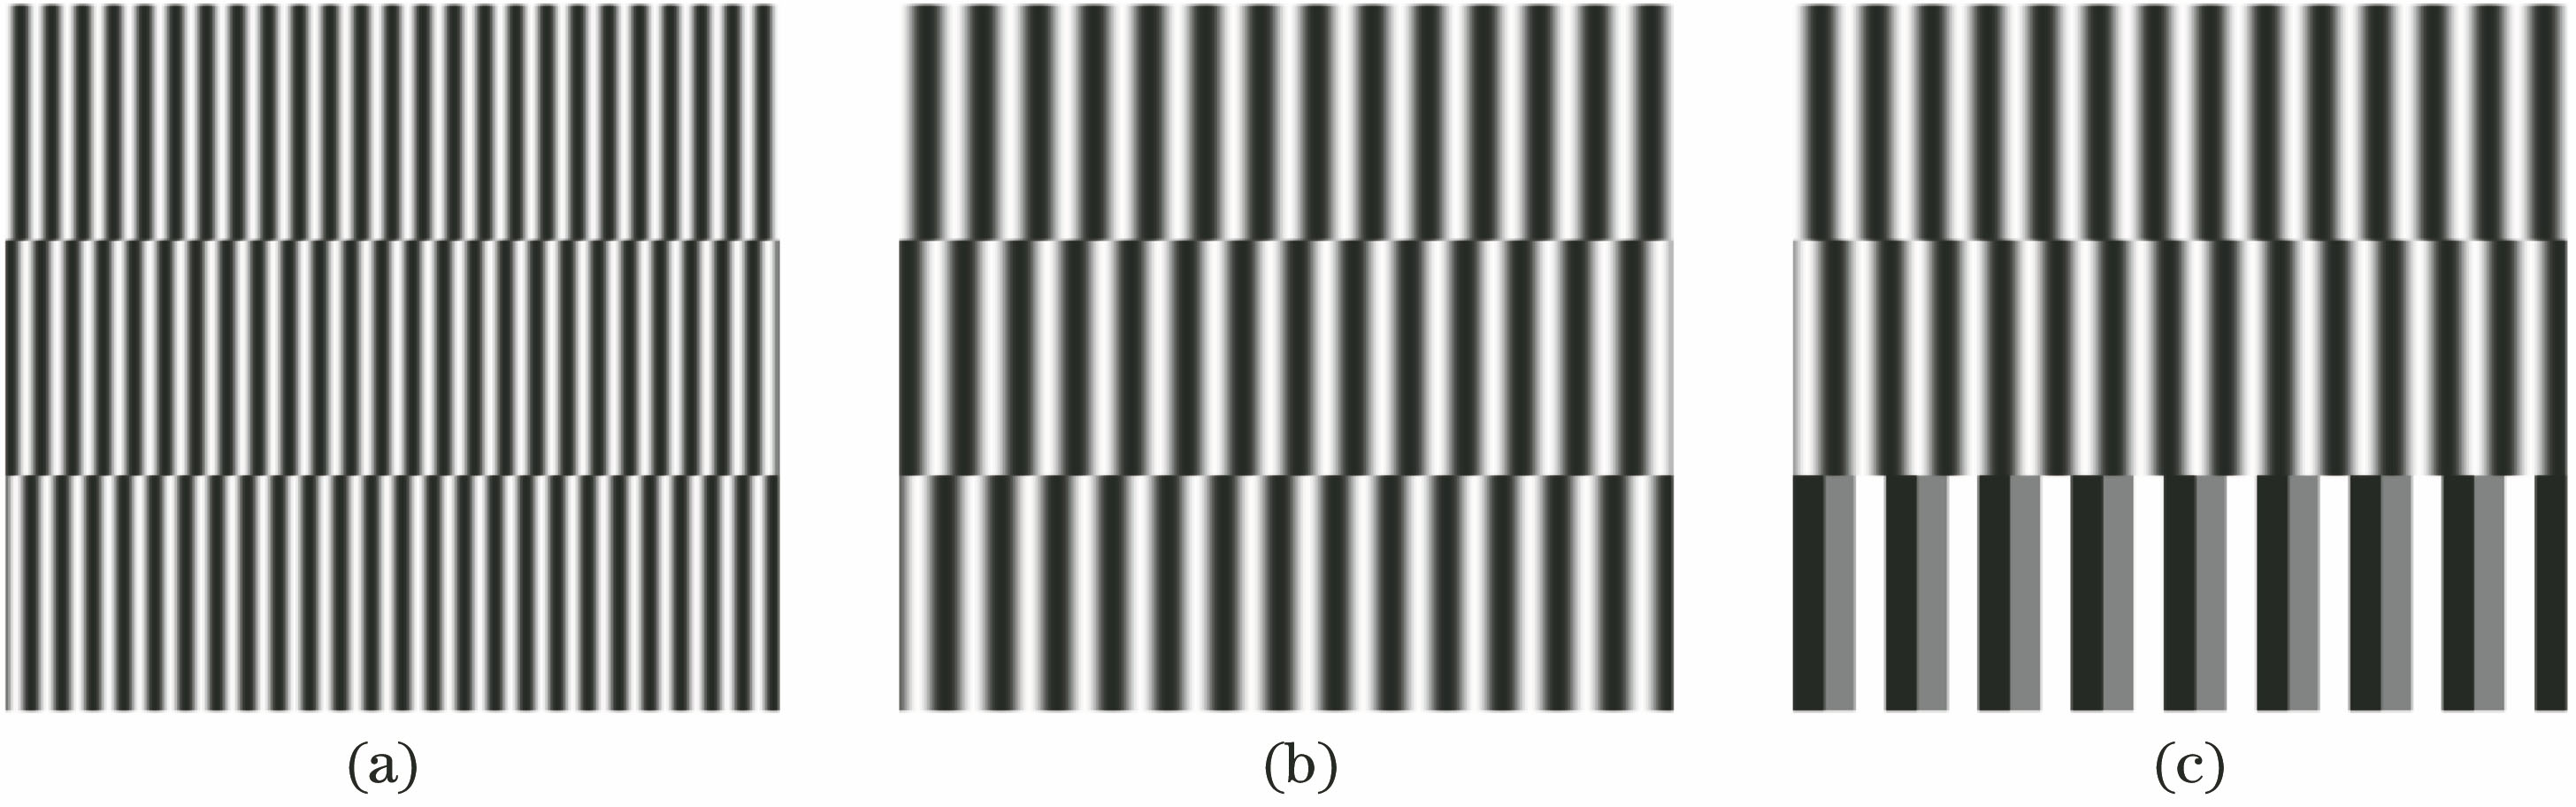 Projected fringe patterns. (a) High-frequency fringes; (b) low-frequency fringes; (c) low-frequency fringe obtained by proposed method